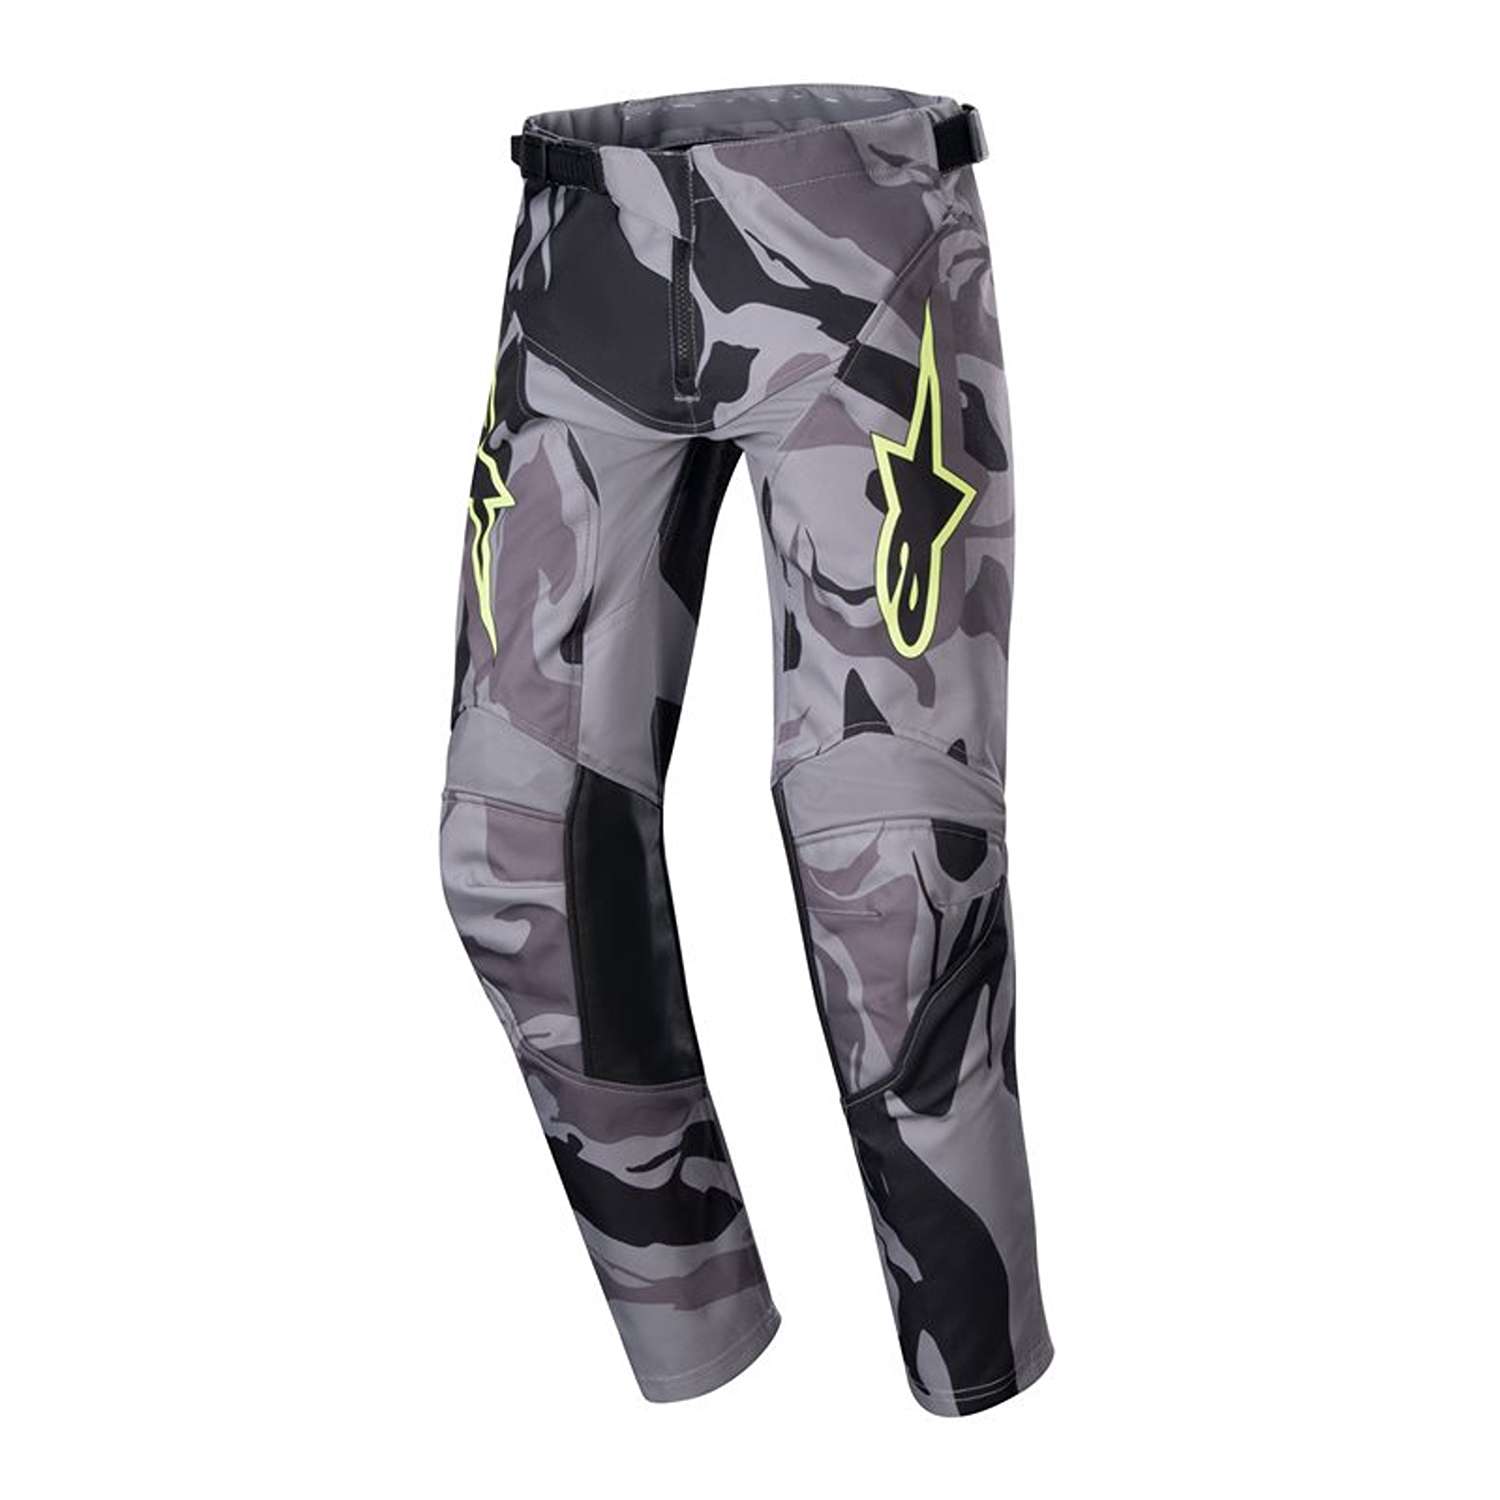 Image of EU Alpinestars Youth Racer Tactical Pants Cast Gray Camo Magnet Taille 26